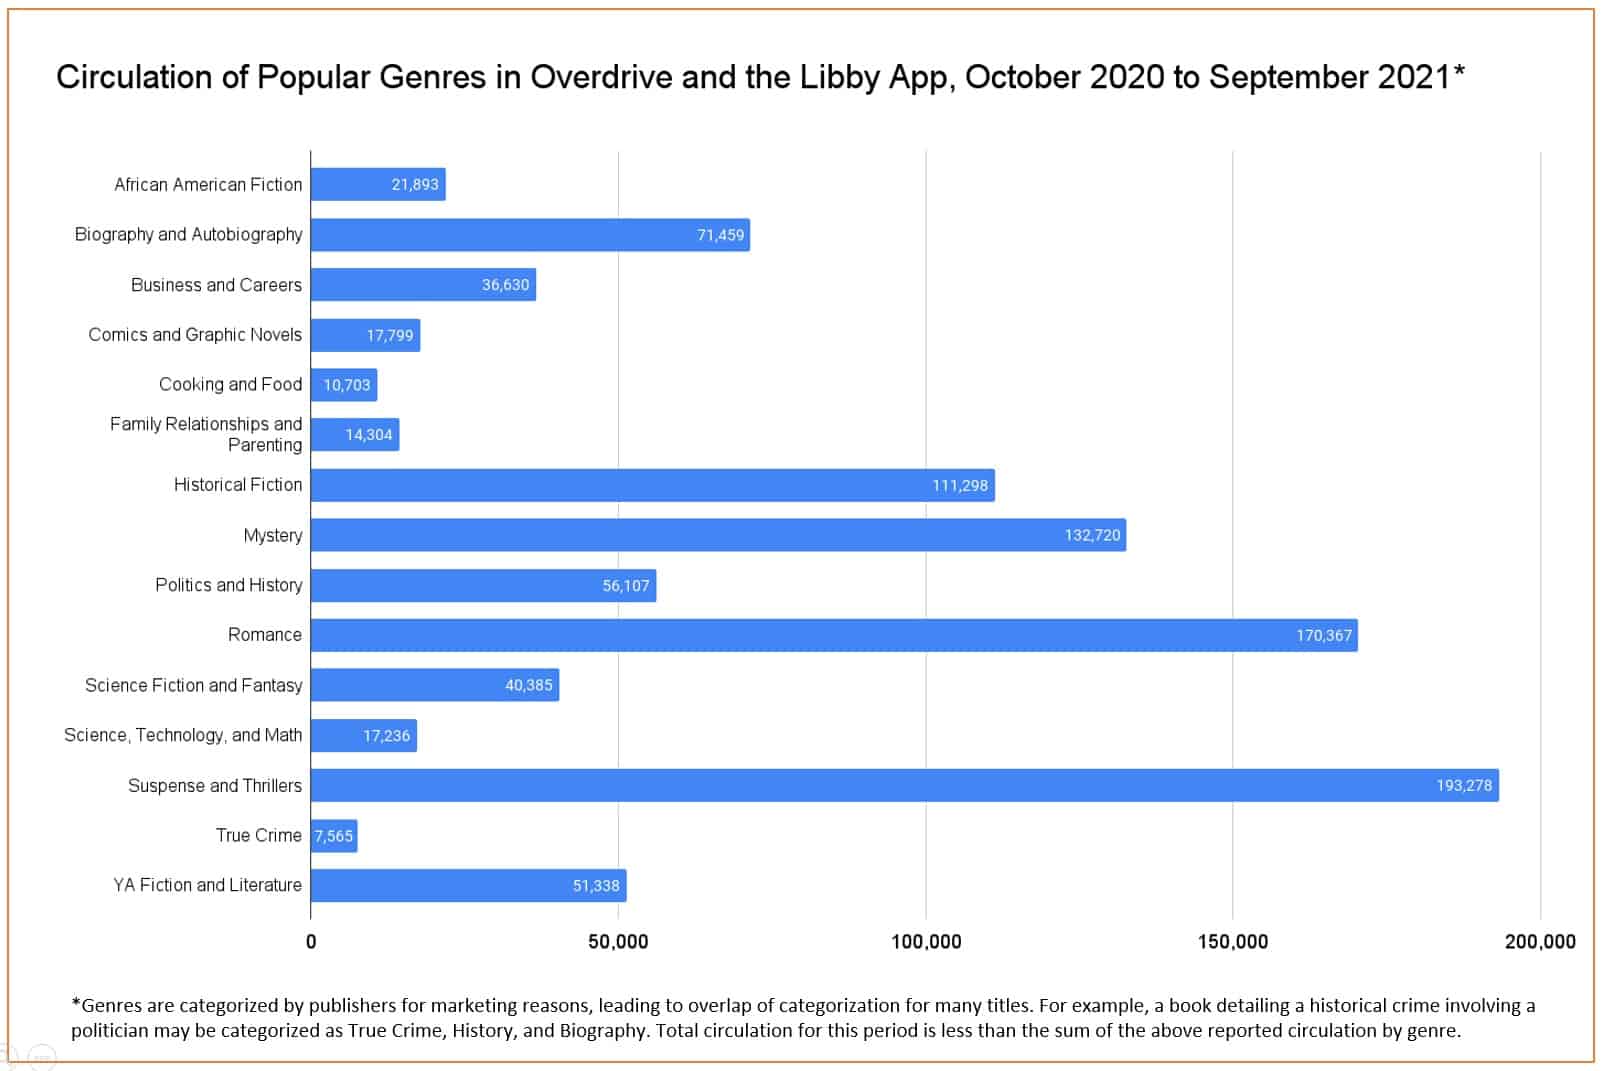 The genres in this chart are categorized by publishers for marketing reasons, leading to overlap of categorization for many titles. For example, a book detailing a historical crime involving a politician may be categorized as True Crime, History, and Biography. Total circulation for this period is less than the sum of the above reported circulation by genre.